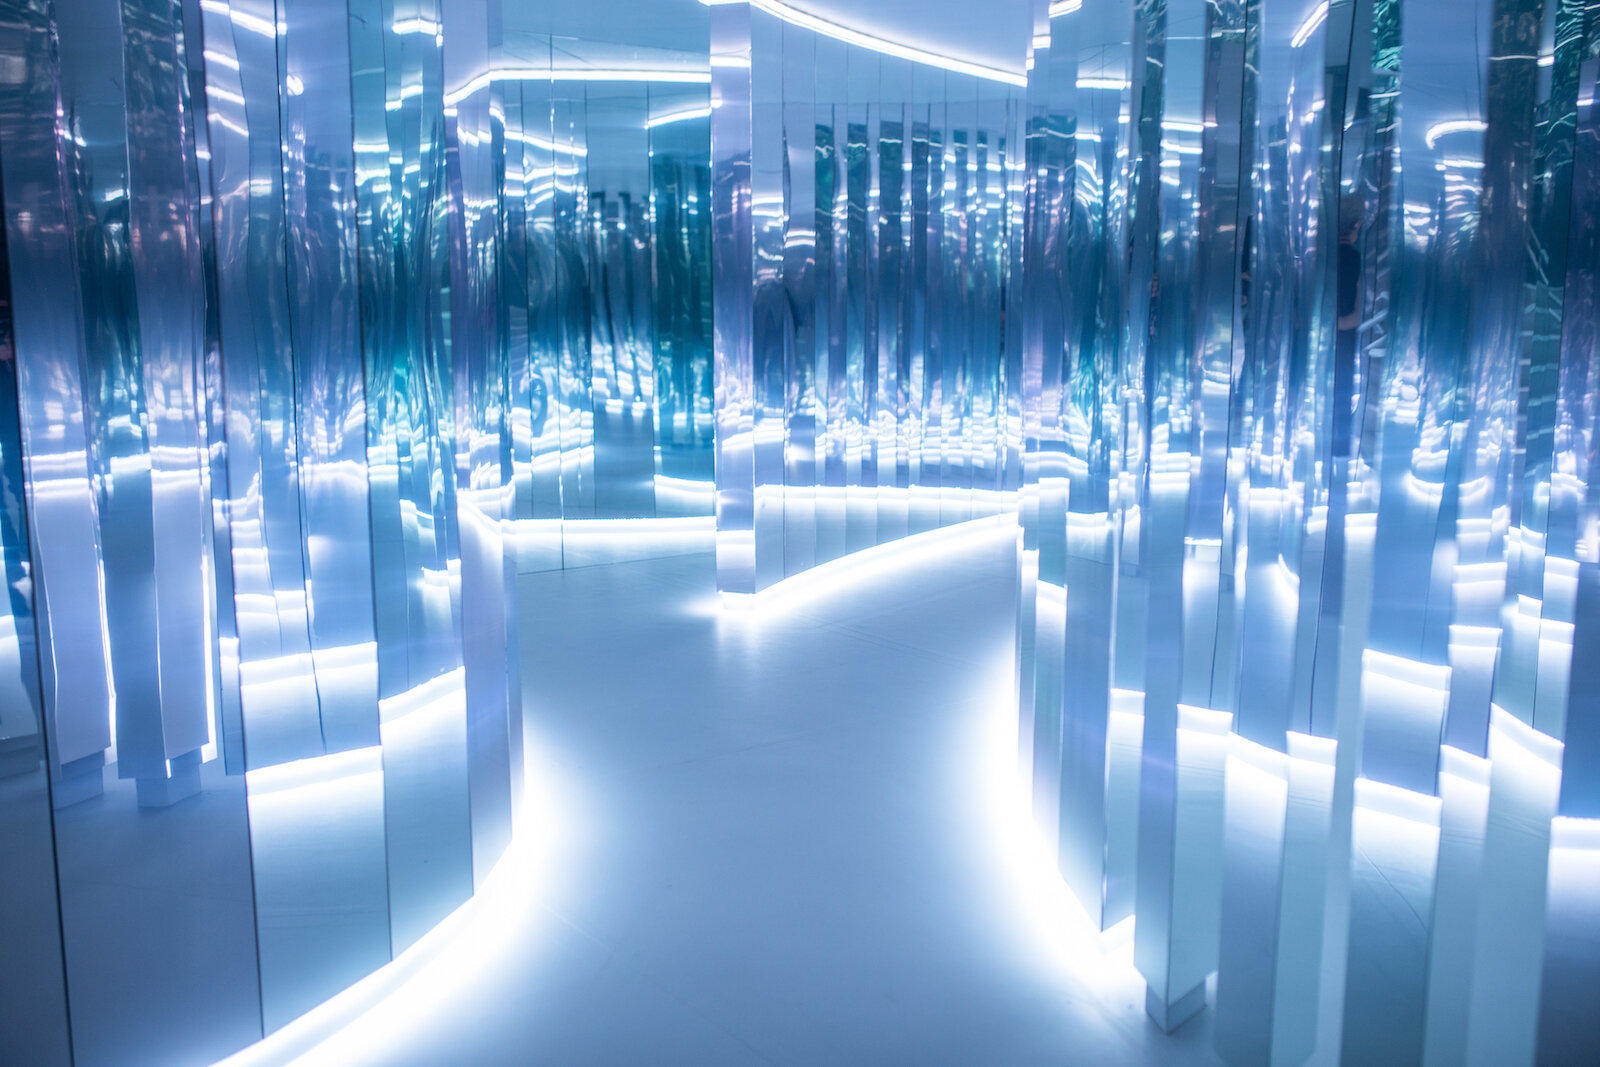 Es Devlin, teamLab, James Turrell to Inaugurate the Superblue Miami  Experiential Art Space - Artwire Press Release from